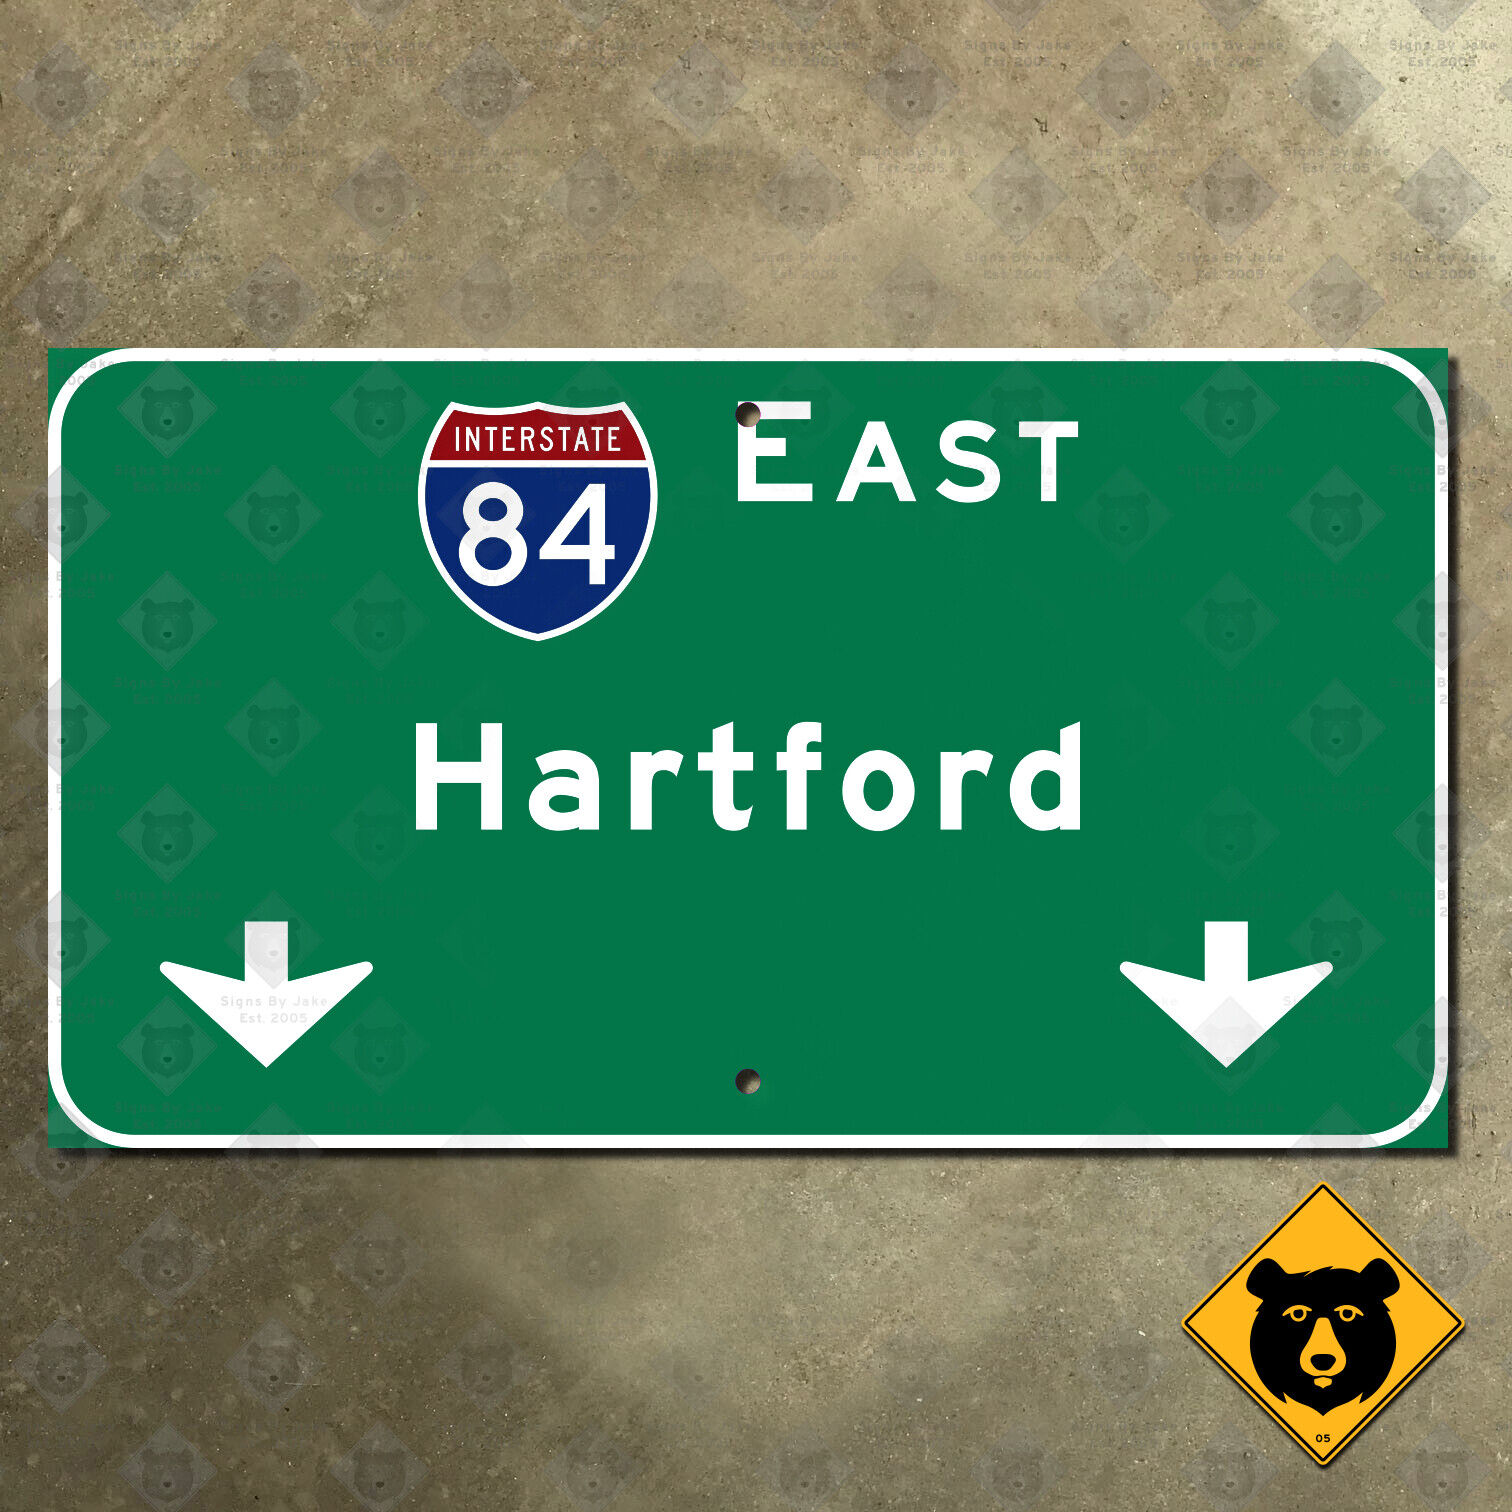 Connecticut Interstate 84 East Hartford freeway highway guide sign 14x8